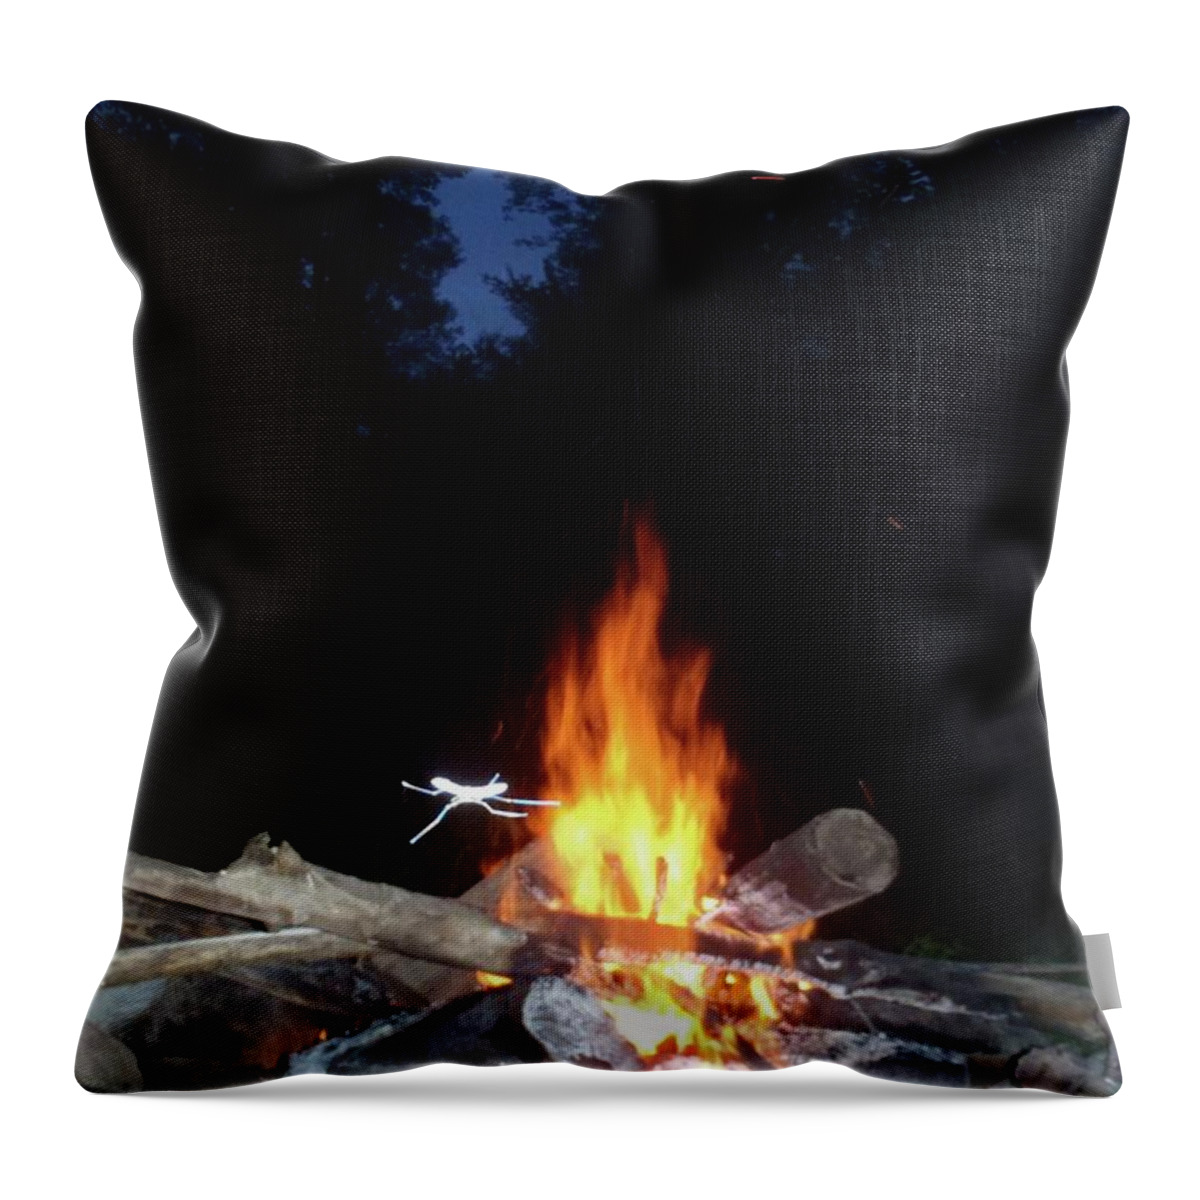  Throw Pillow featuring the photograph Warming Up By The Fire by Freddy Alsante